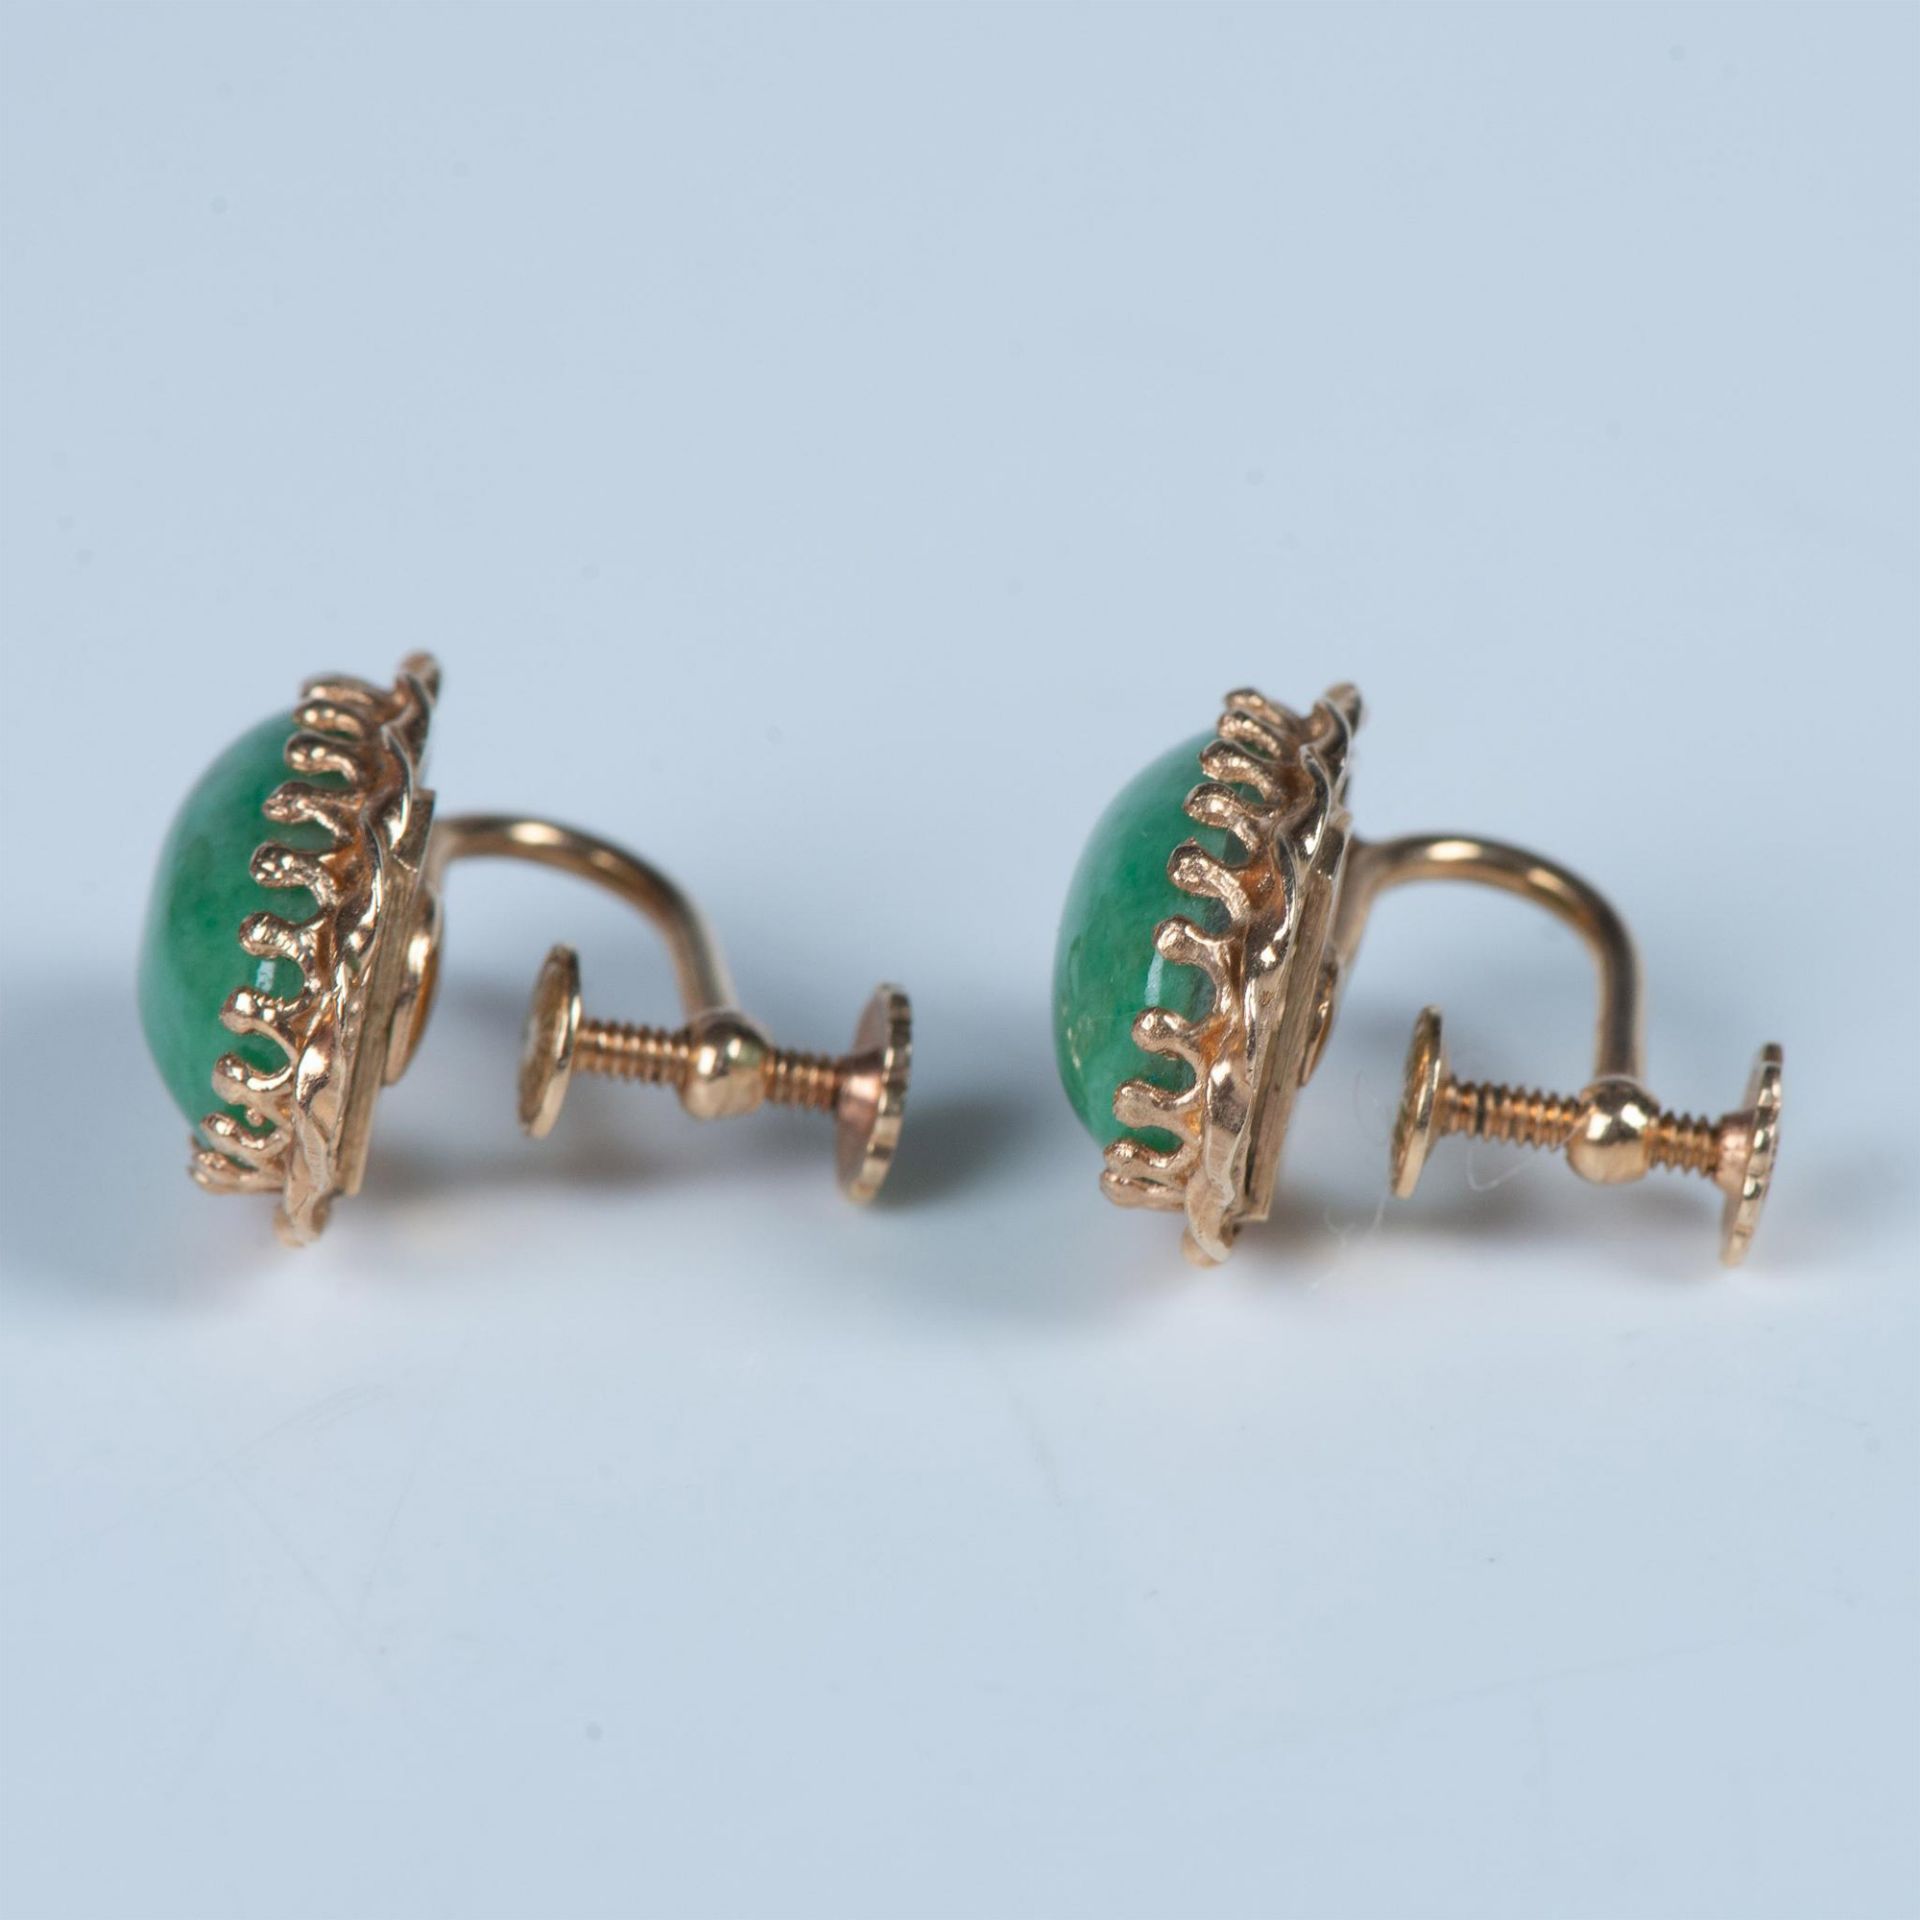 Russian Jade and Gold Earrings - Image 2 of 5